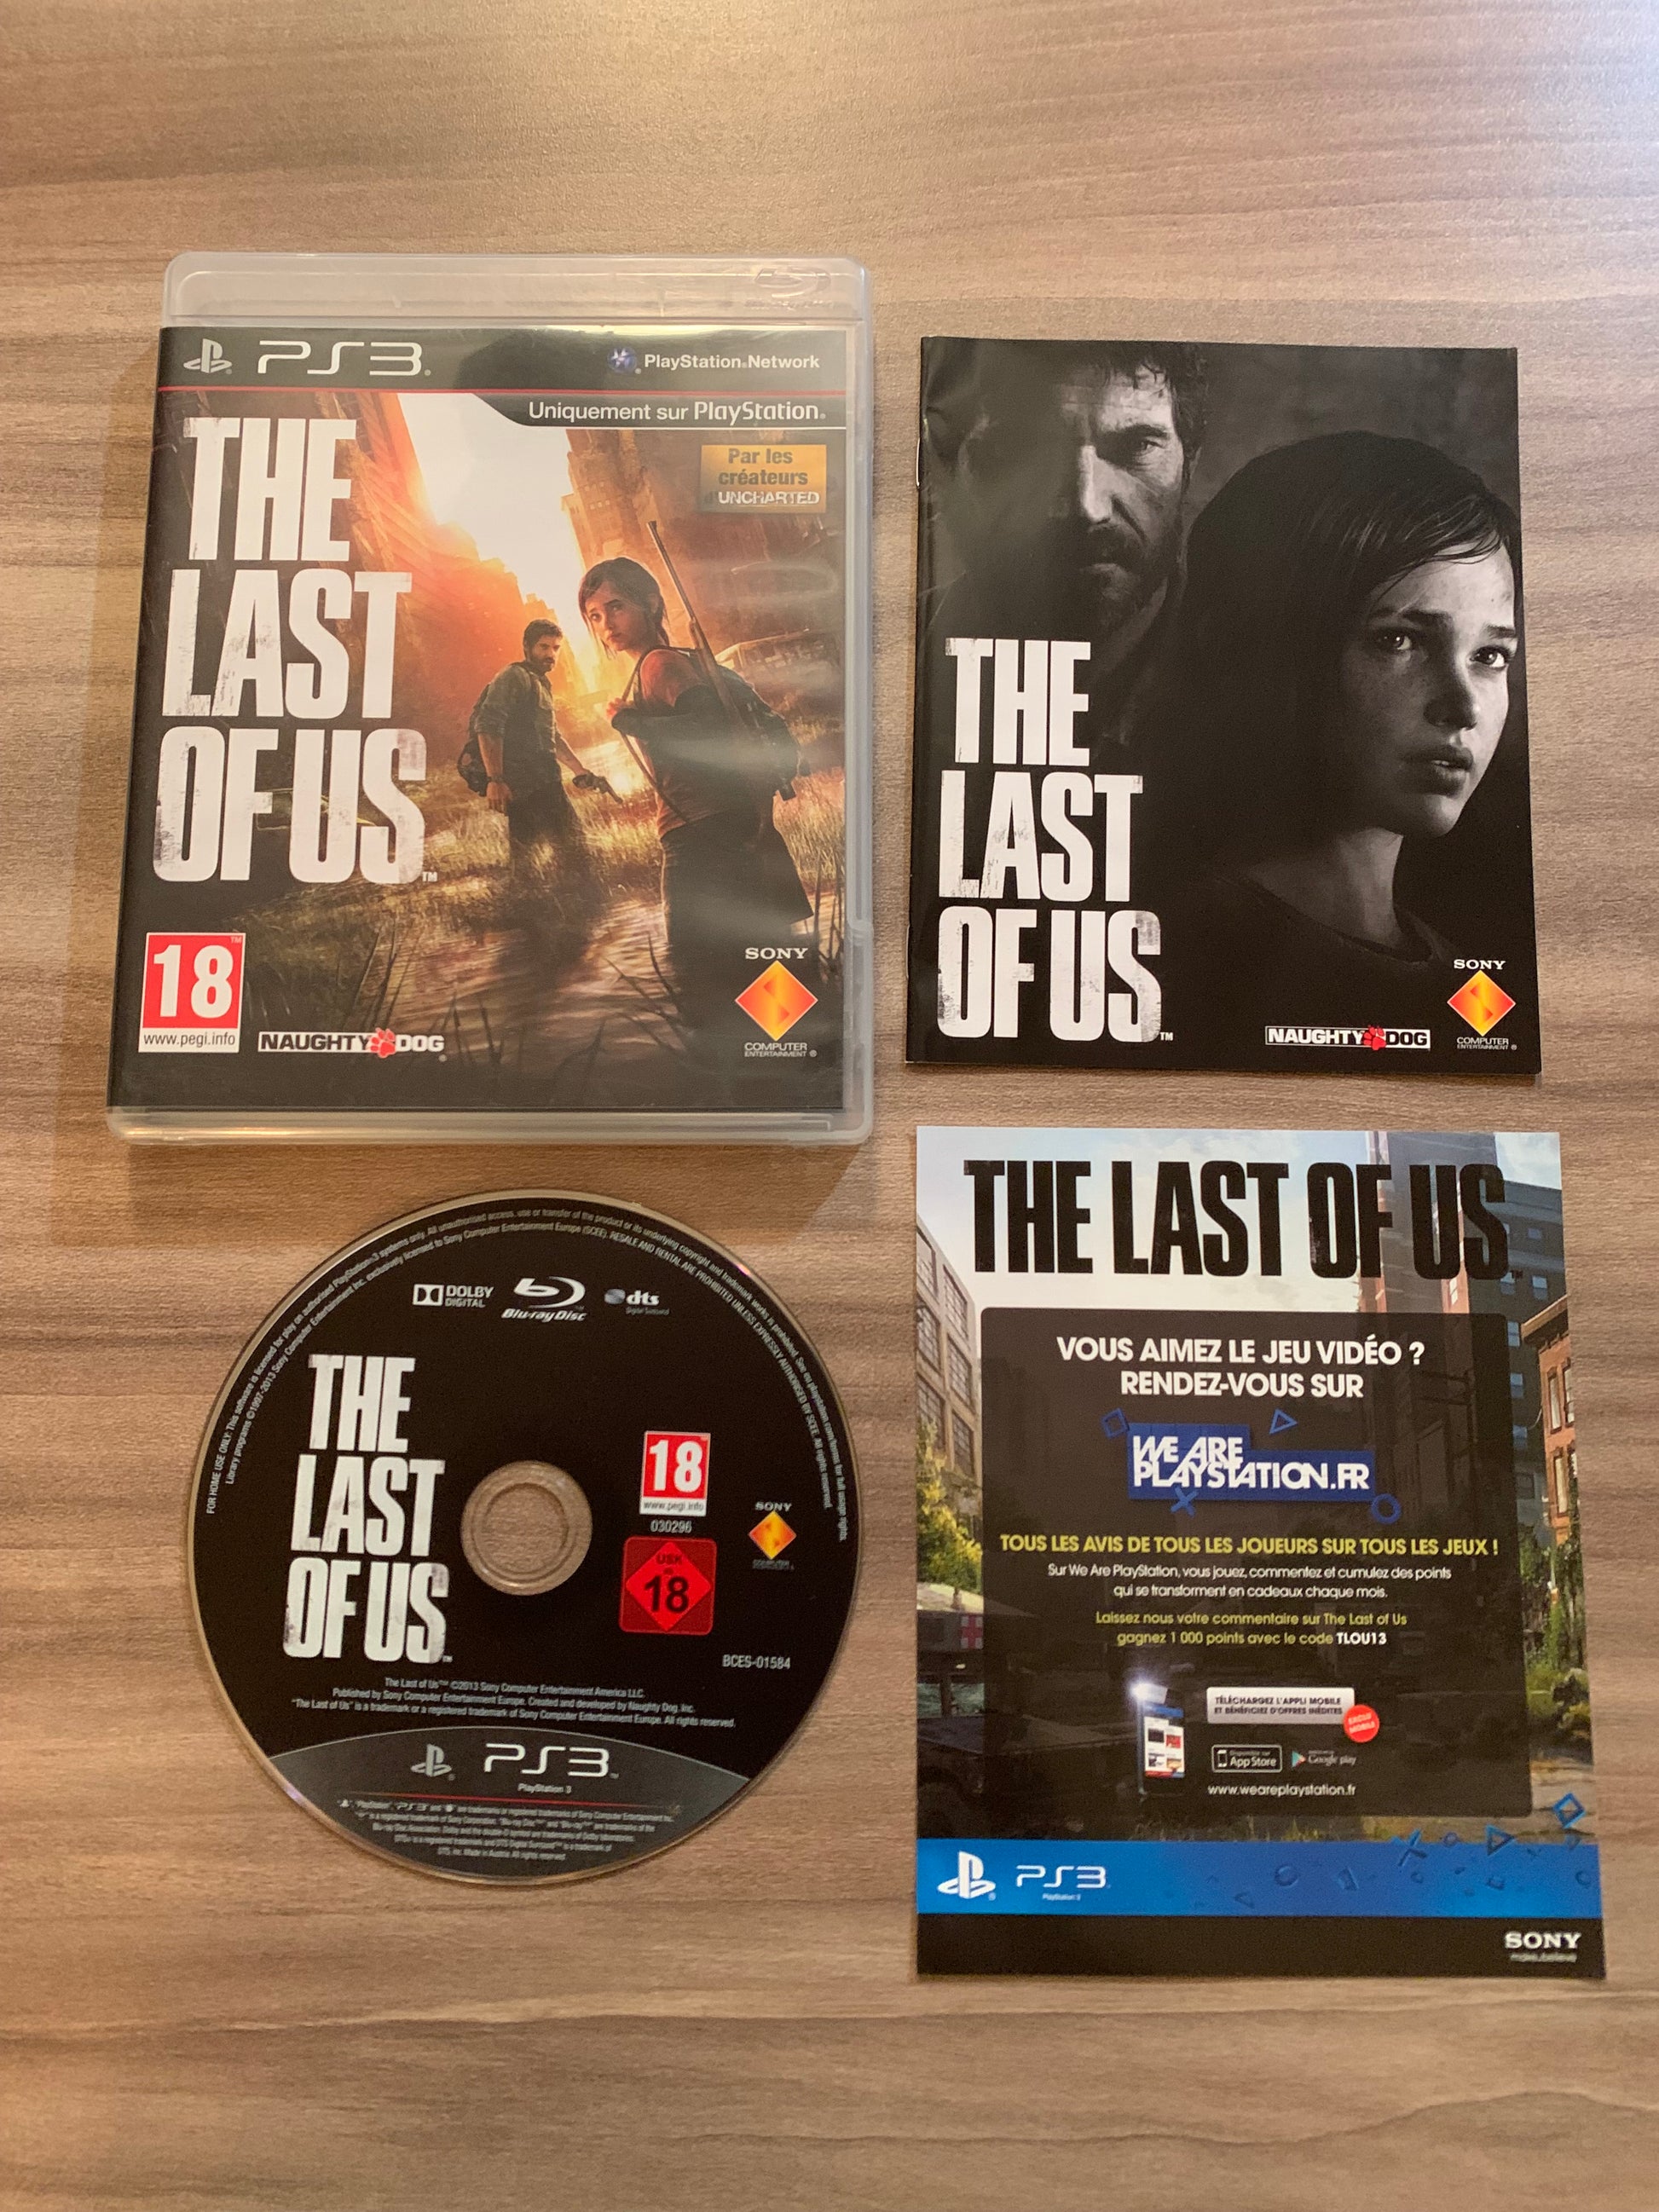 PiXEL-RETRO.COM : SONY PLAYSTATION 3 (PS3) COMPLET CIB BOX MANUAL GAME PAL THE LAST OF US